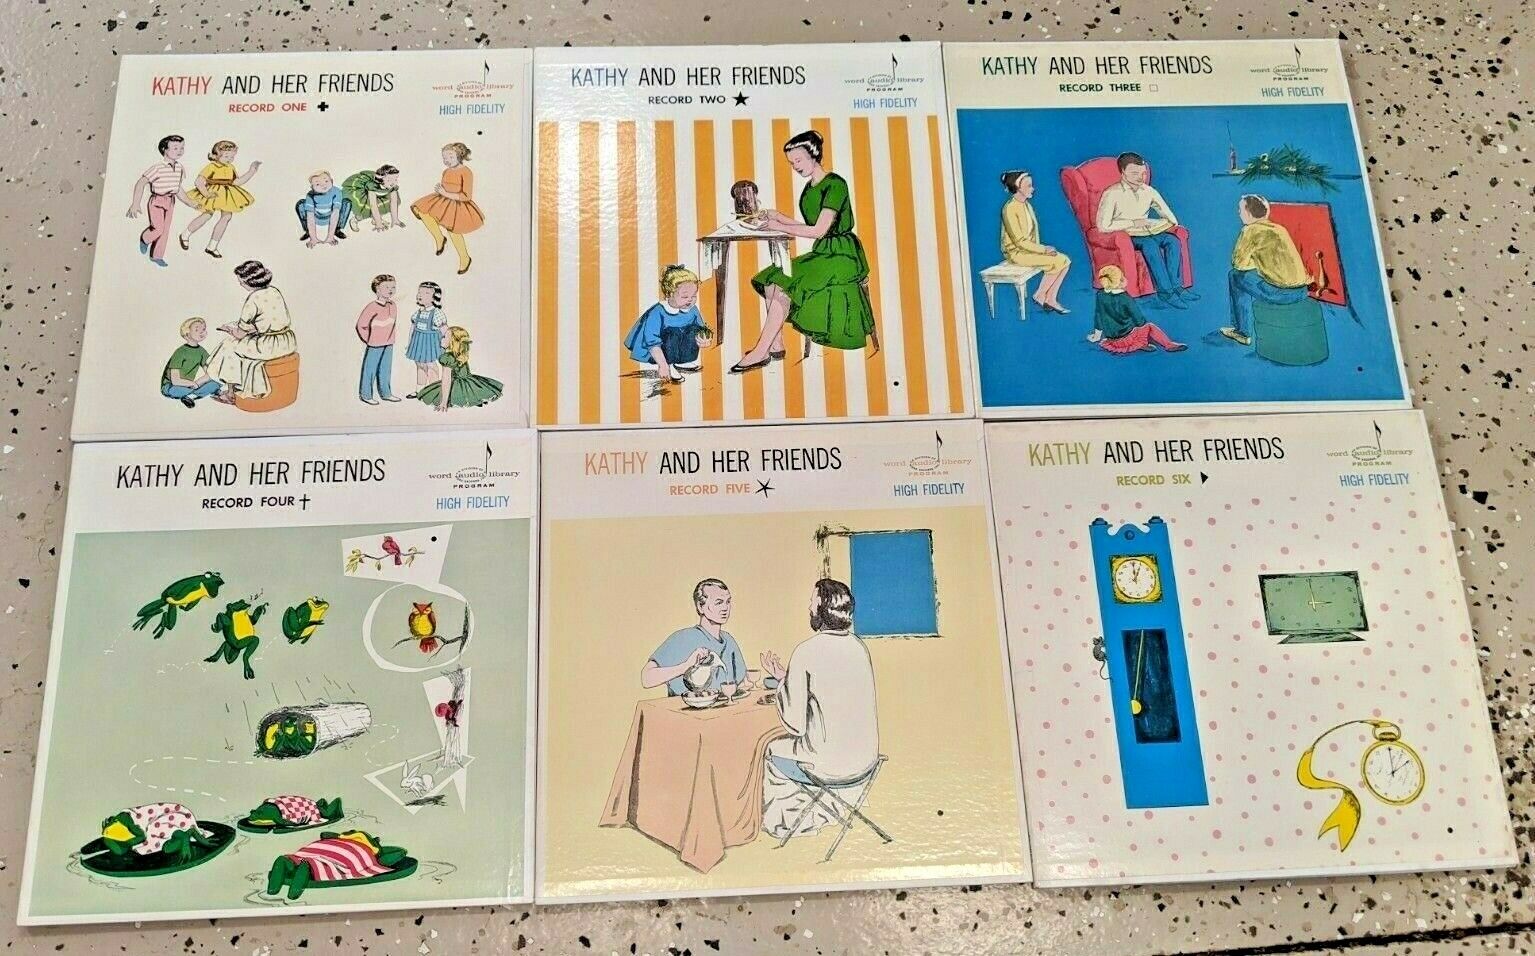  Antique Kathy and Her Friends 1-6 Record Set 1946 Waco Texas Word Records Prop 